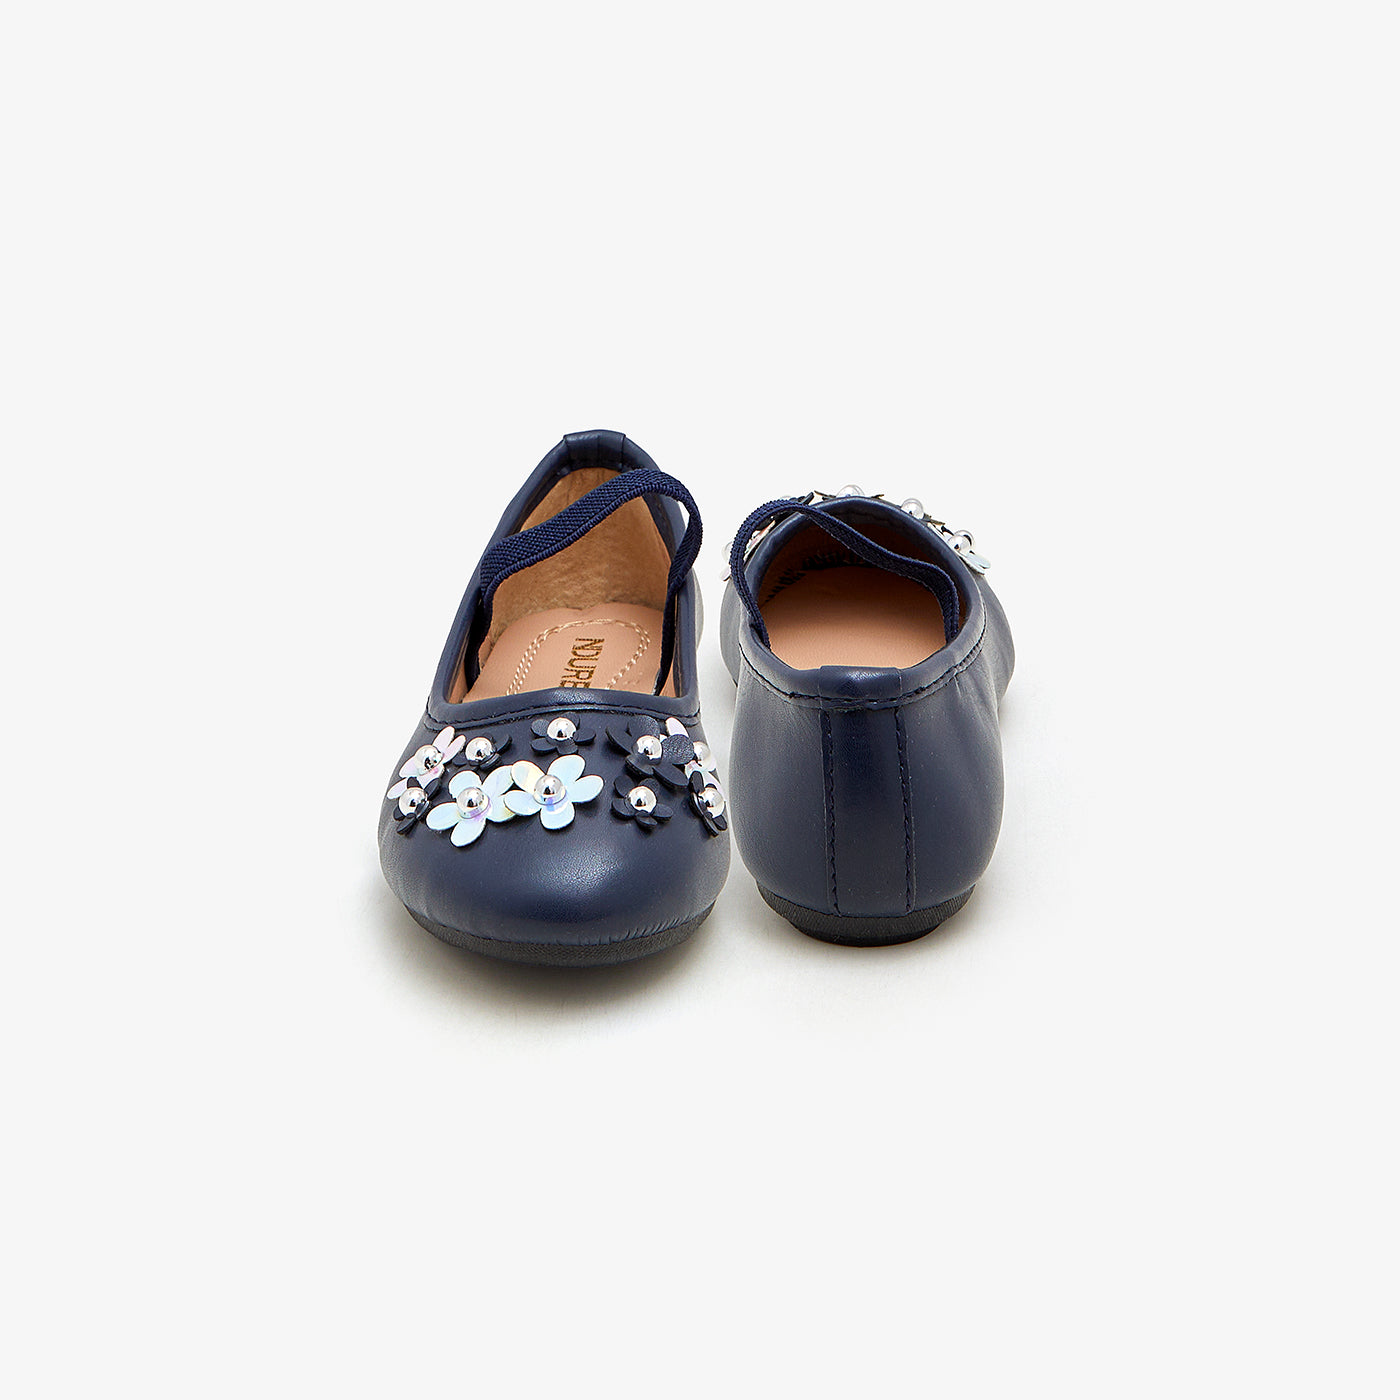 Girls Pumps with Floral Motif